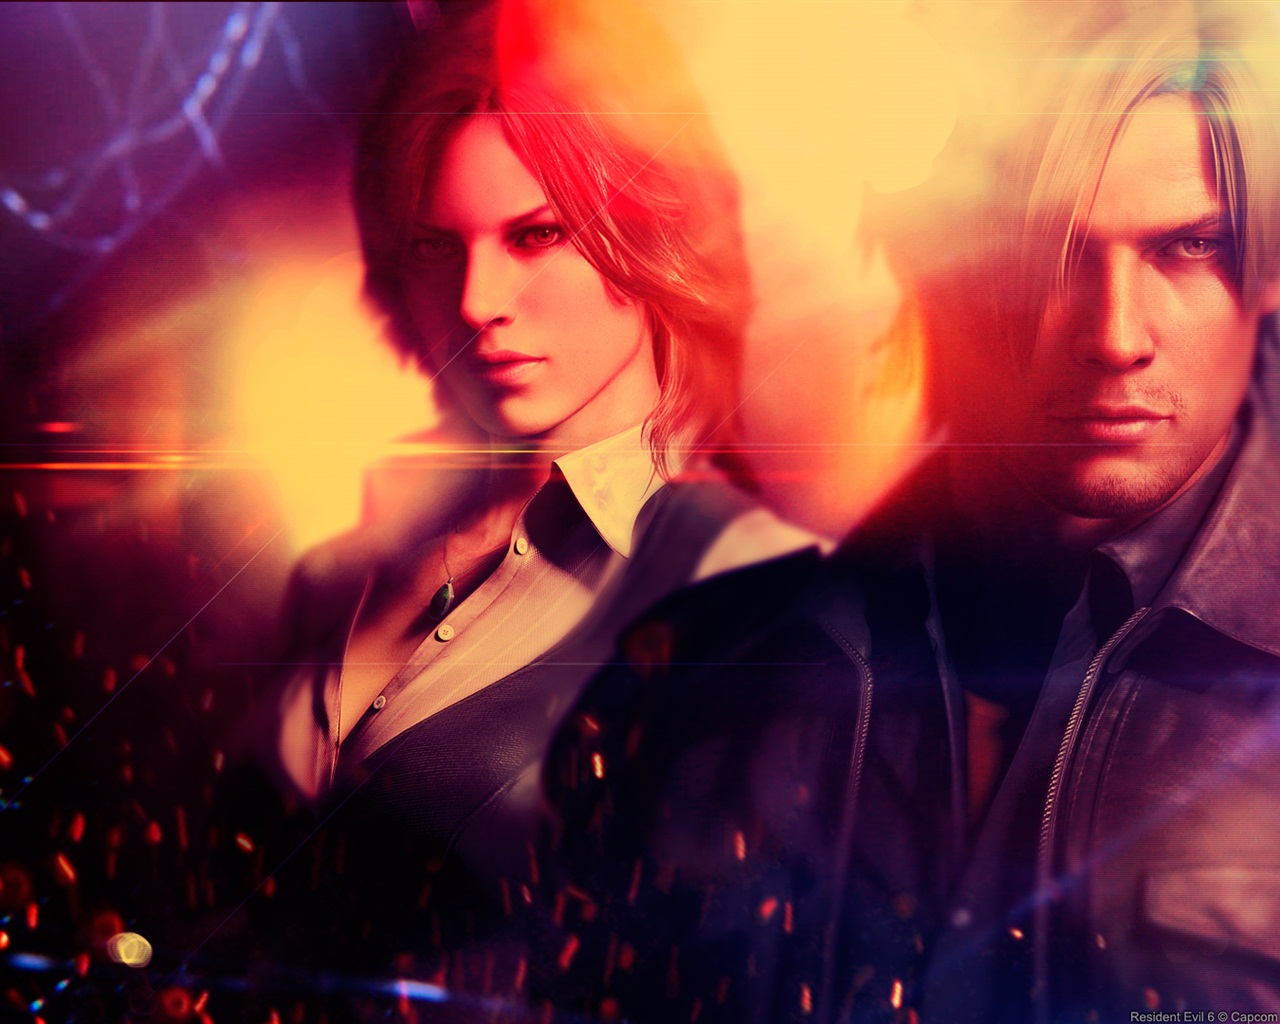 Resident Evil 6 HD game wallpapers #8 - 1280x1024